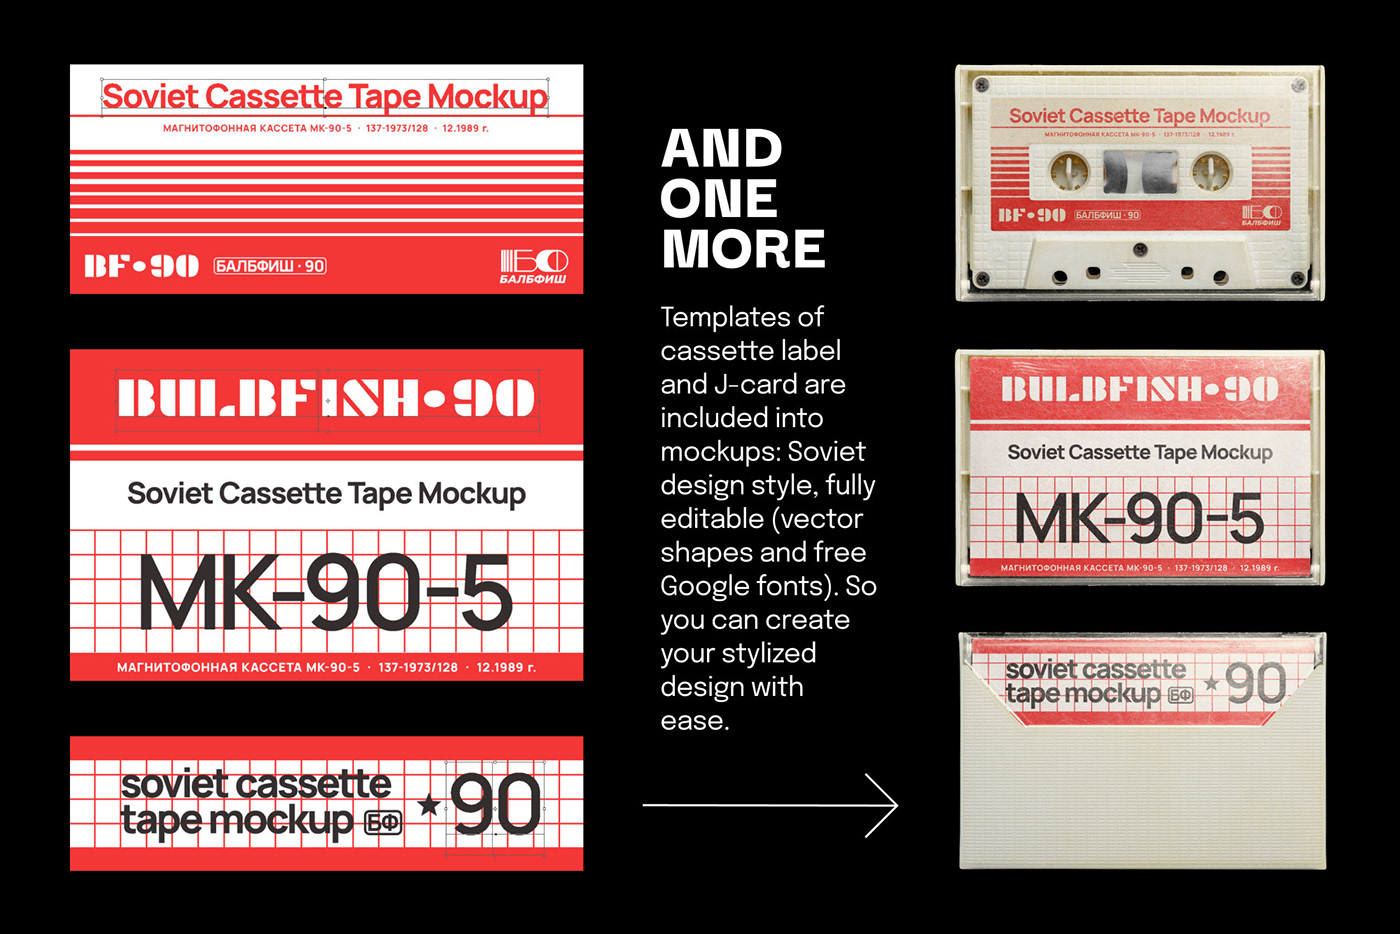 Bonus: templates of cassette label and J-card are included into mockups